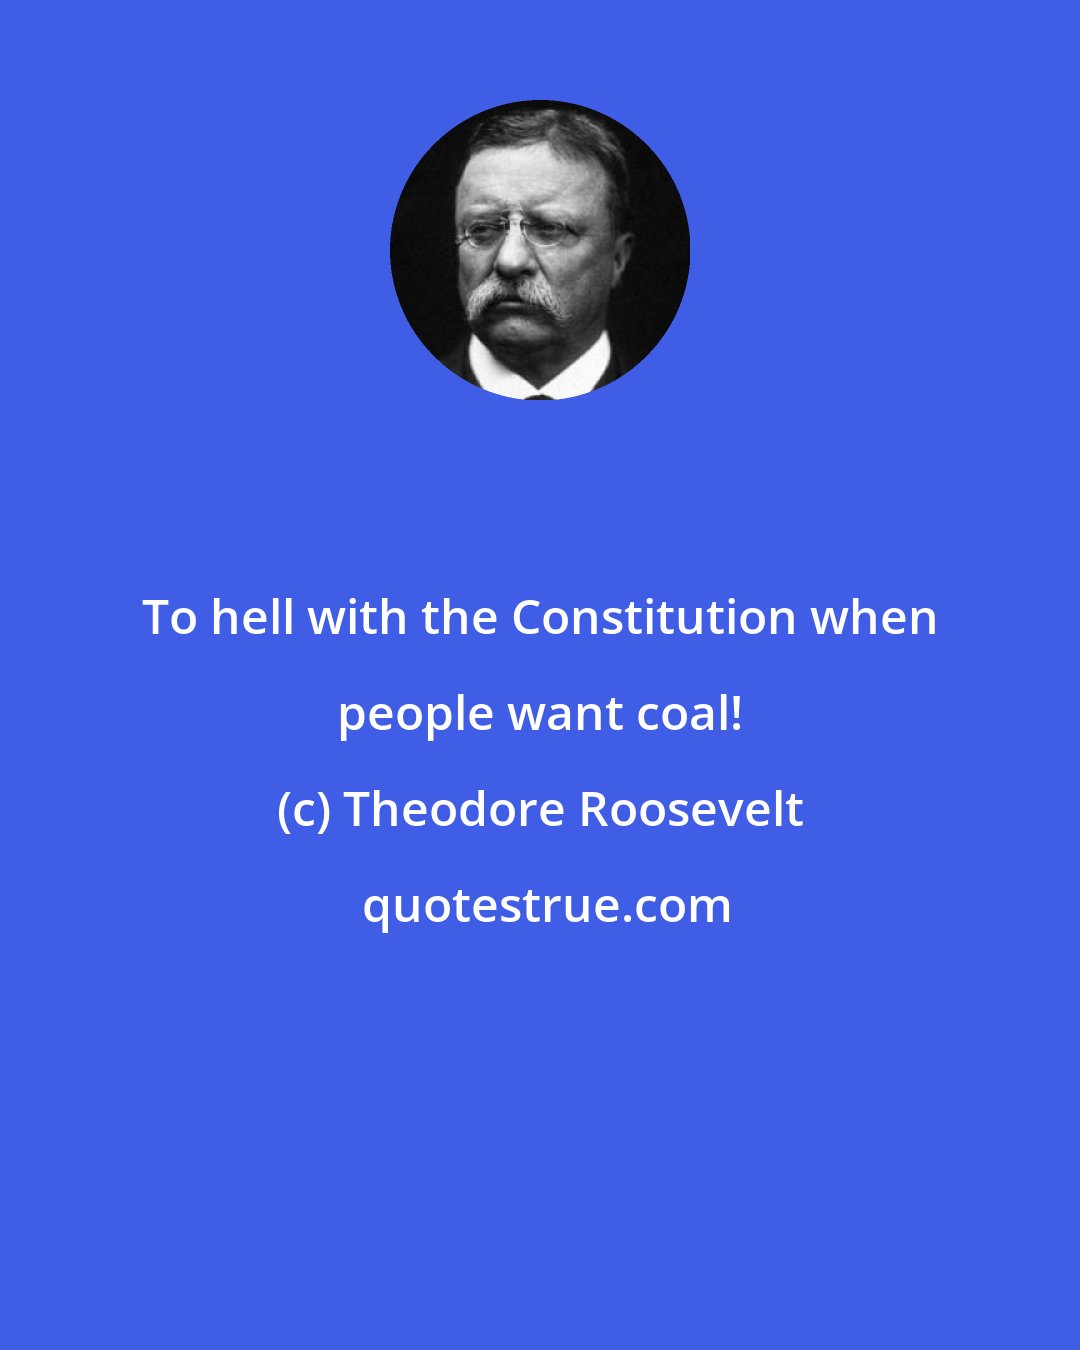 Theodore Roosevelt: To hell with the Constitution when people want coal!